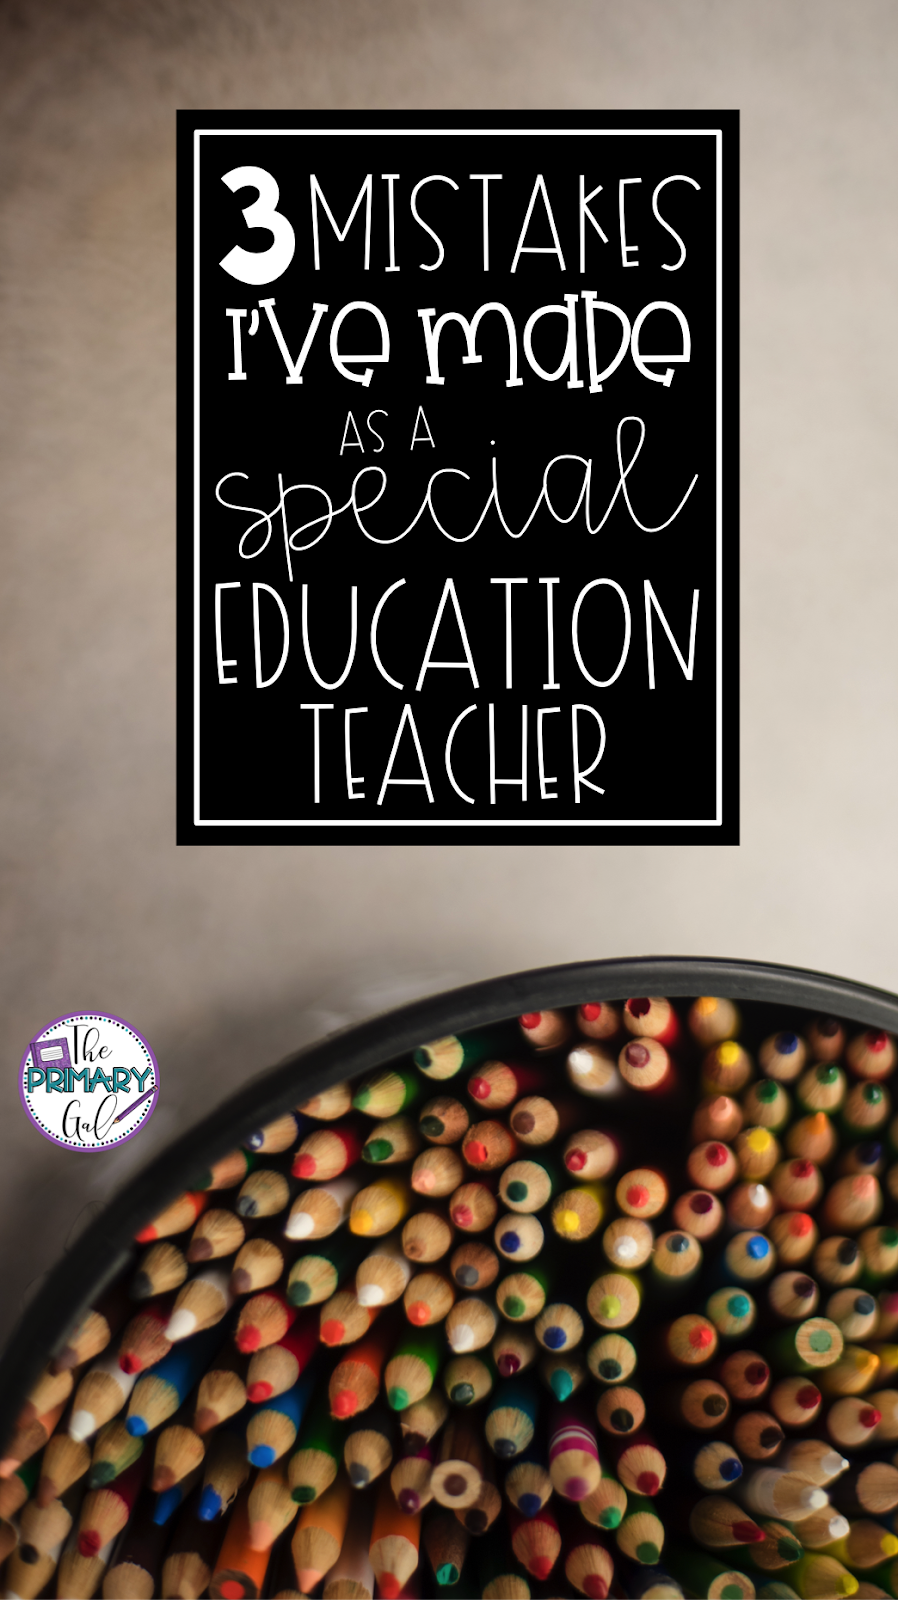 Being a special education teacher is hard. Sometimes you need to take a step back and refocus. This post will share 3 mistakes I've made as a special education teacher, in hopes that it will help you. You'll also find the link to my Tpt store for an IEP writing course. Starting fresh with a new outlook on how to best serve your kids, write measurable goals, and monitoring progress are some of the topics covered. {IEP, special education, course}